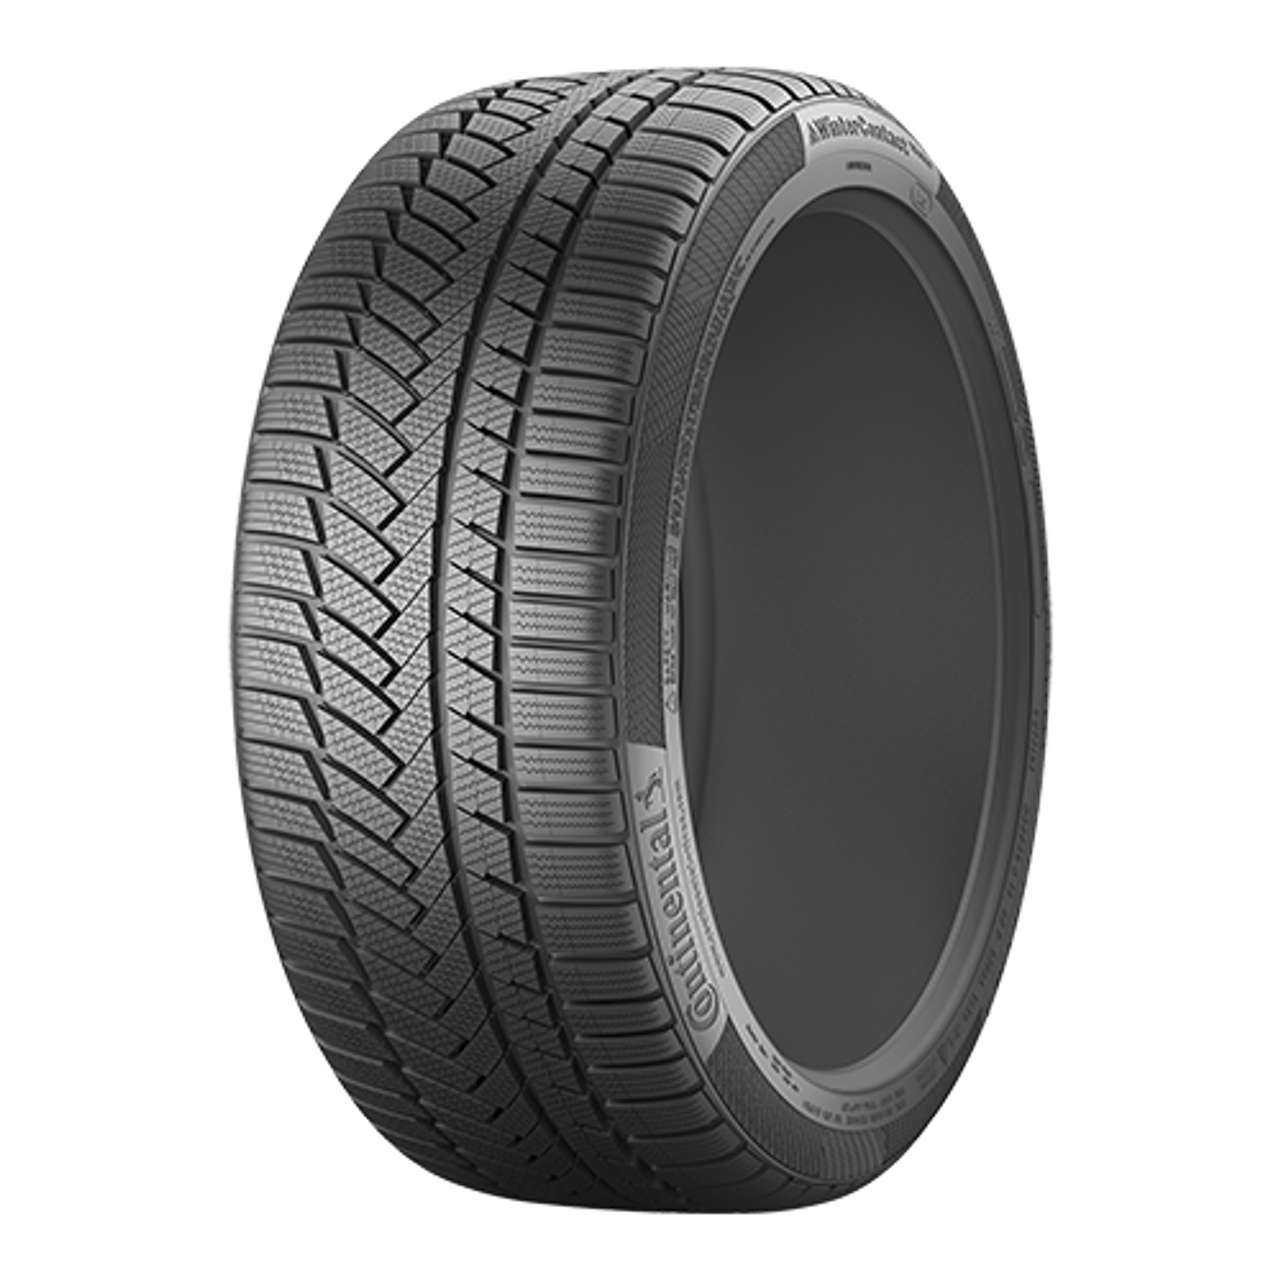 CONTINENTAL WINTERCONTACT TS 850 P SUV 265/55R19 113V FR BSW von Continental